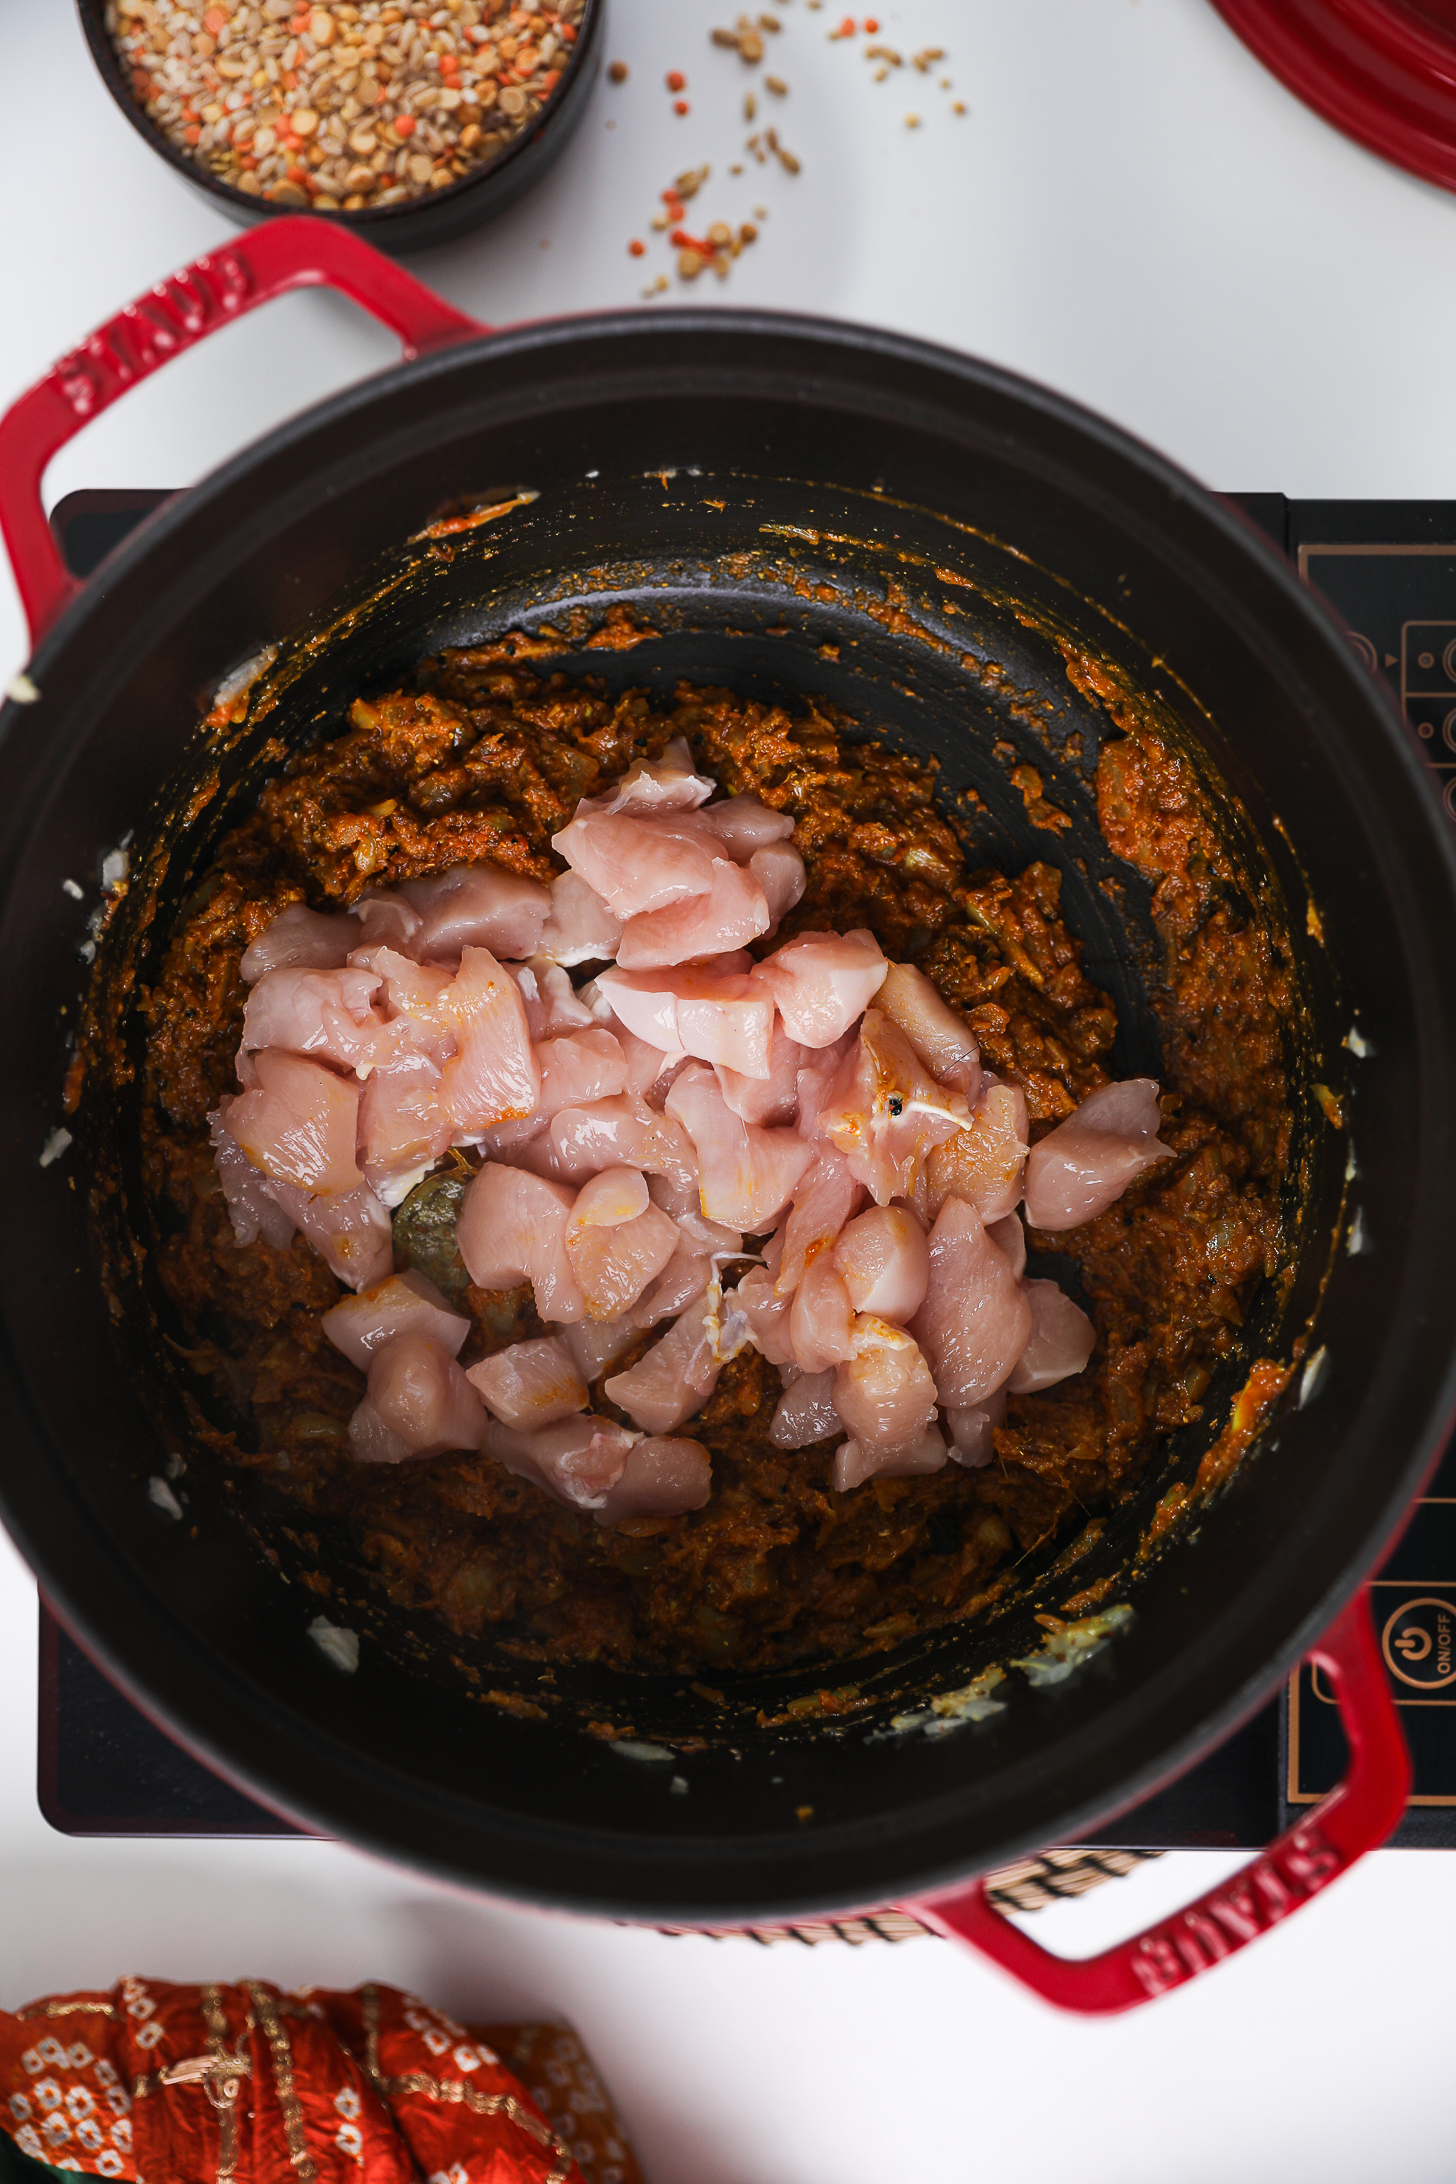 Spiced tomato-onion mixture topped with chunks of chicken breast in a cook pot.